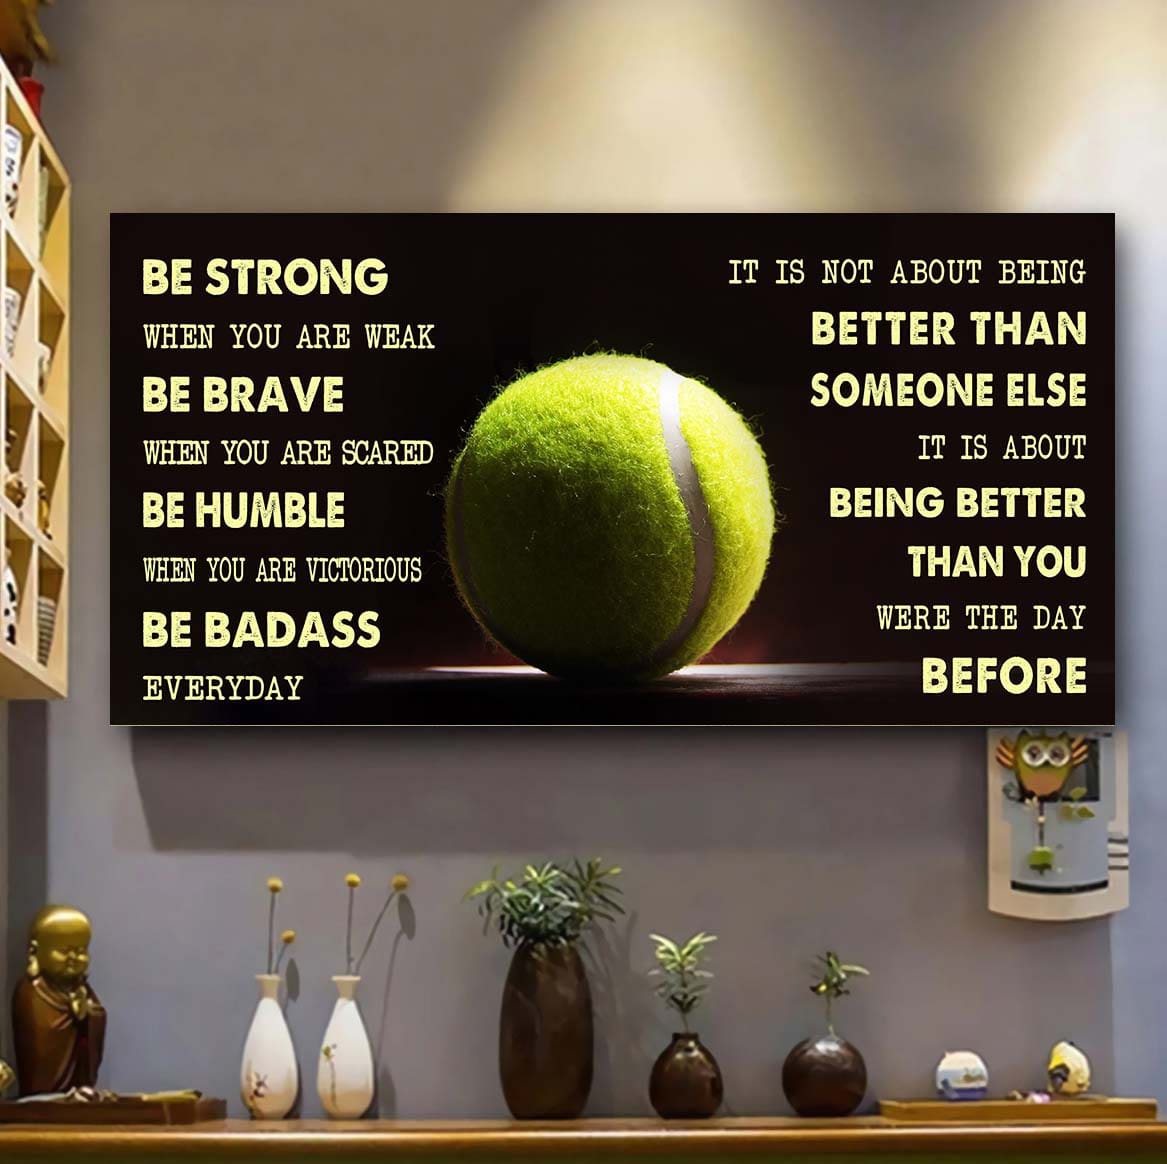 Basketball Poster It Is Not About Being Better Than Someone Else - Be Strong When You Are Weak